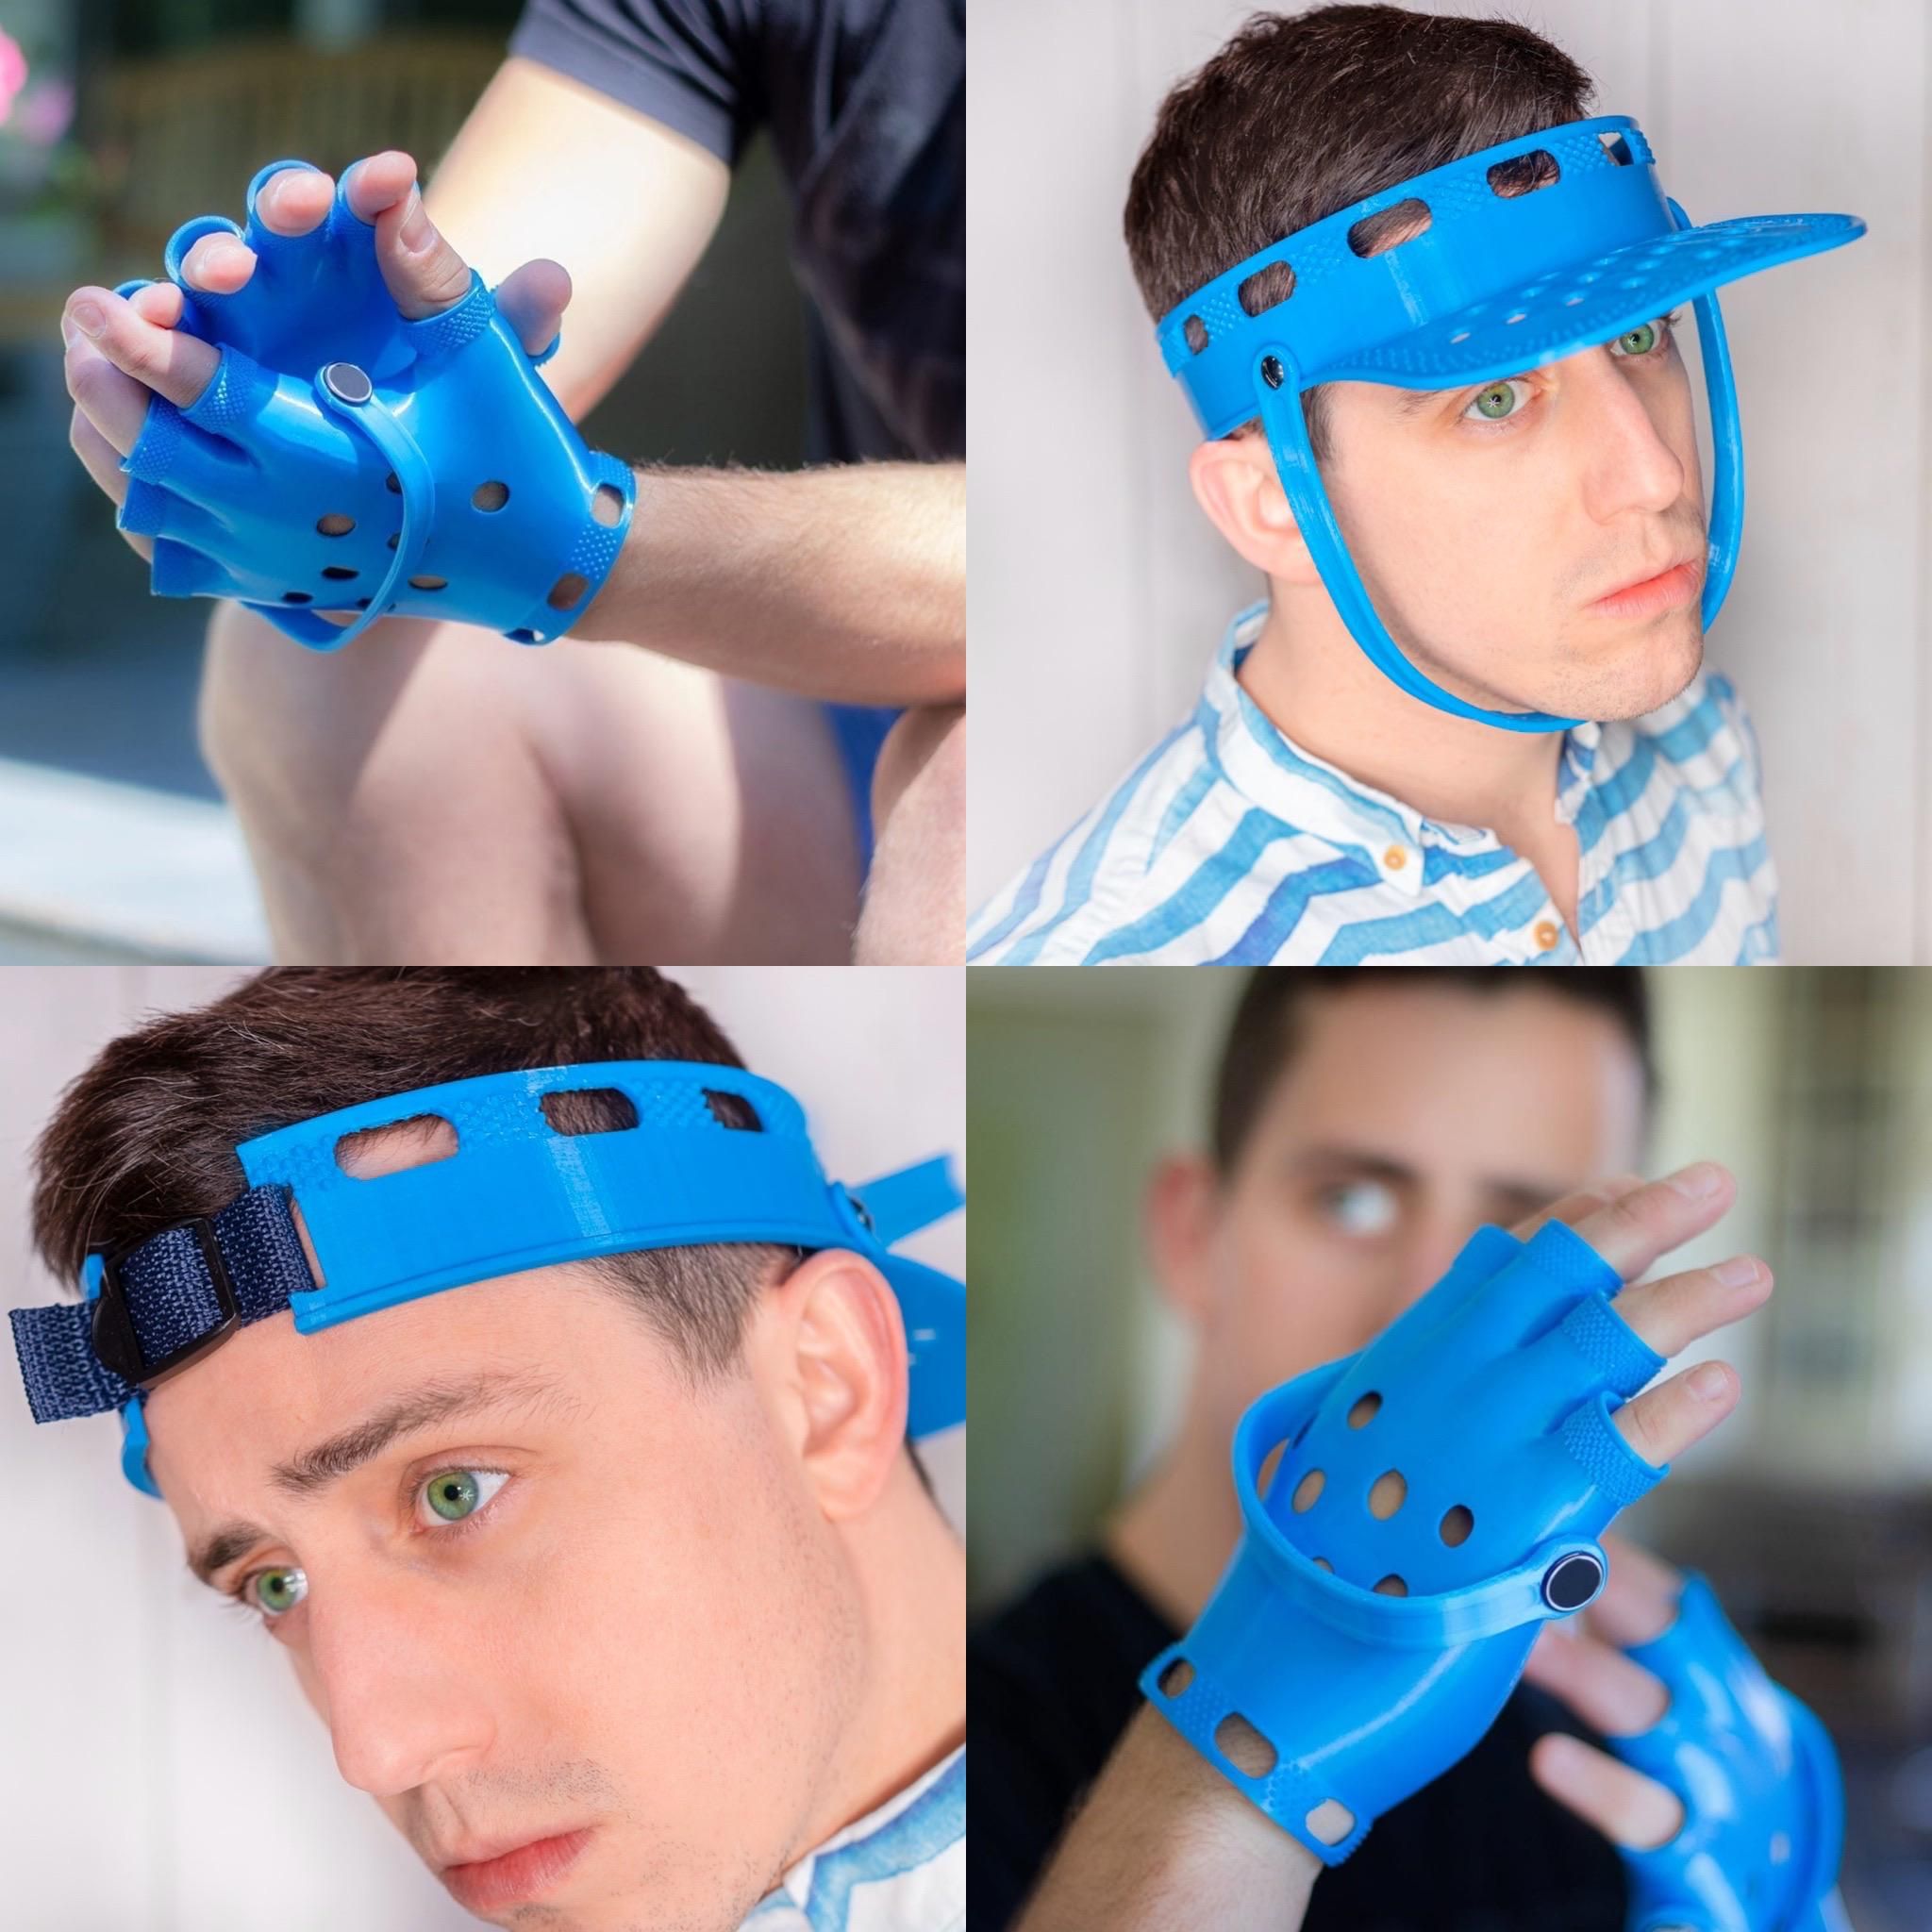 I enjoy designing fake products, so I created a visor inspired by these gloves I made.